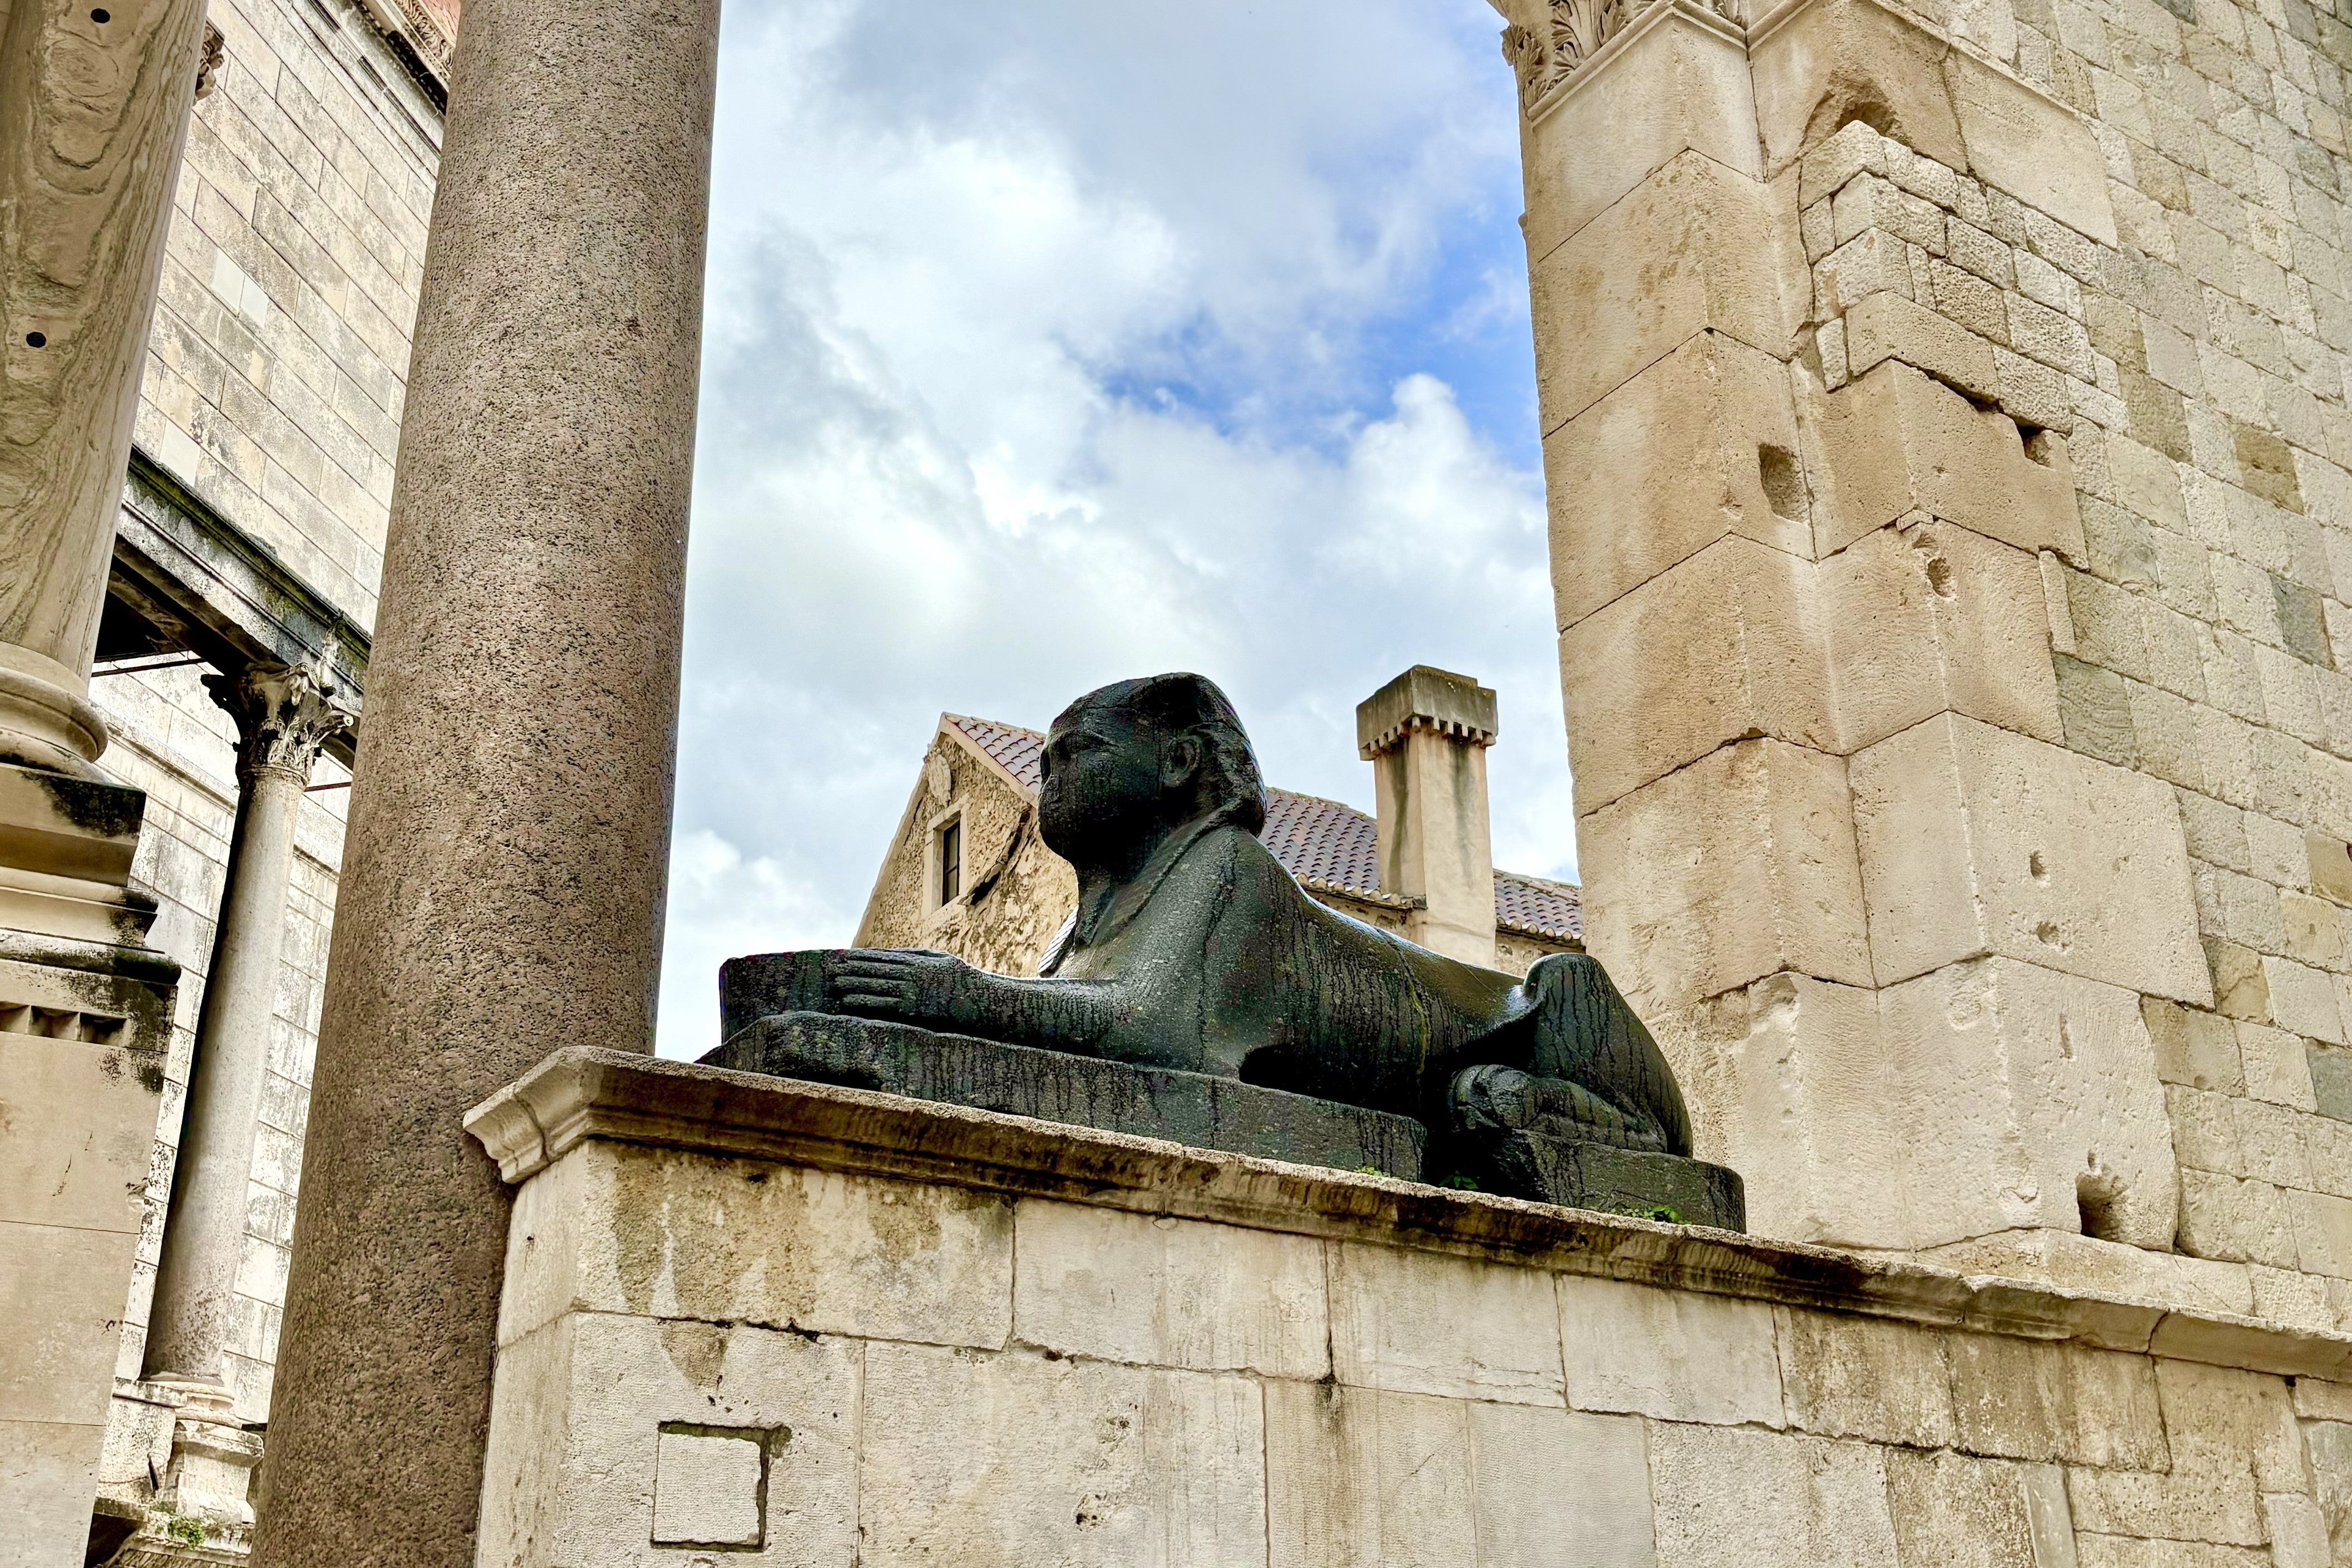 Split’s very own sphinx was a decorative touch brought over by Diocletian from ancient Egypt